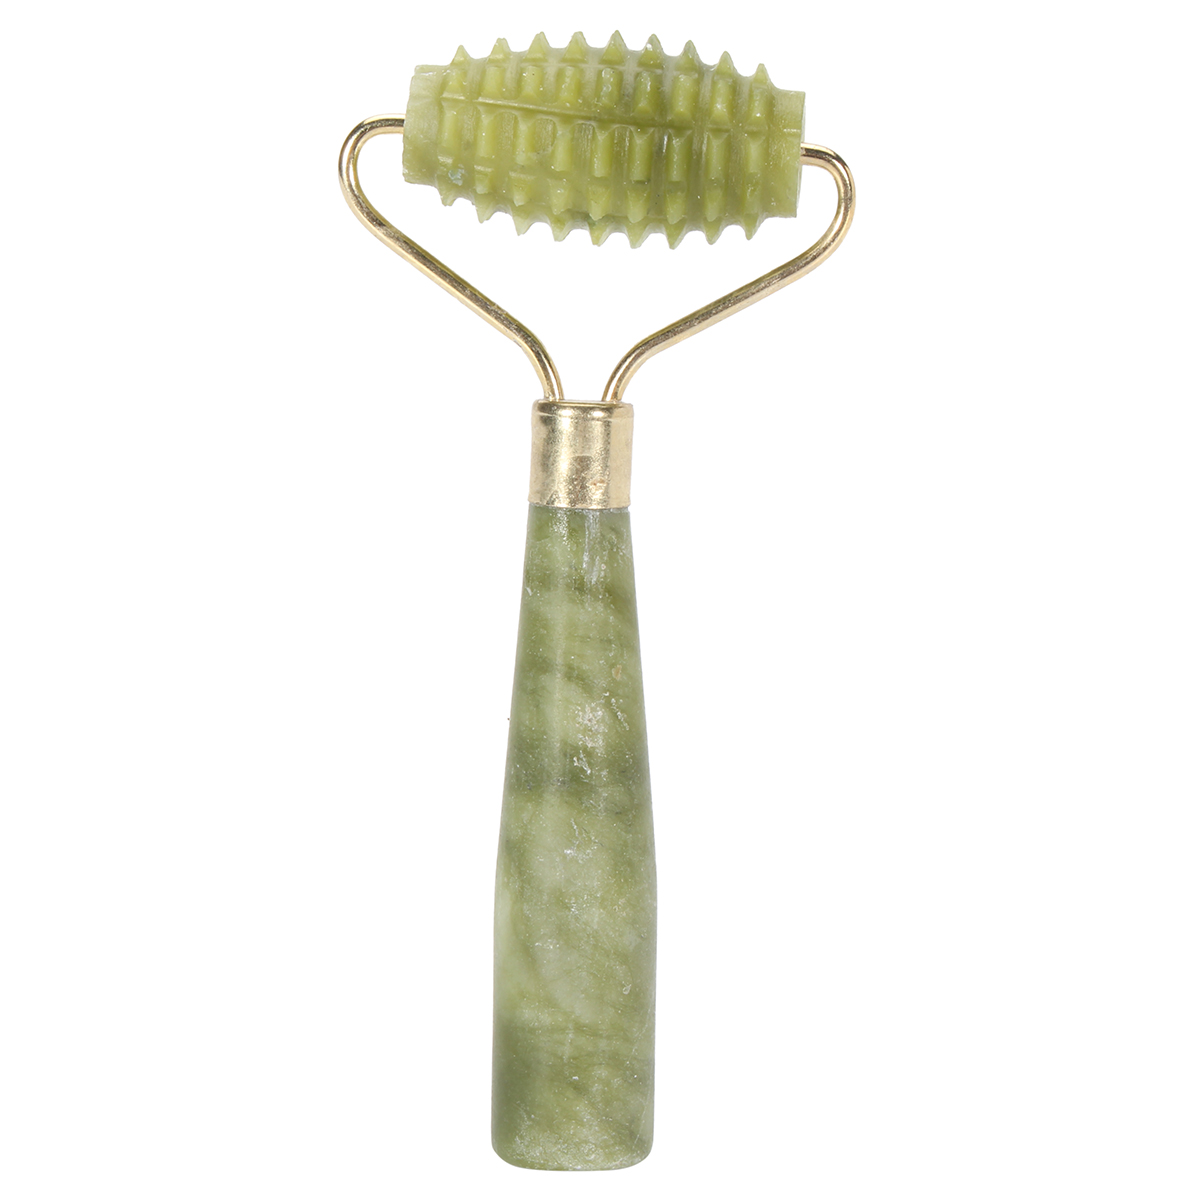 Anti-Wrinkles-Aging-Jade-Facial-Roller-Beauty-Tools-Face-Skin-Slimming-Massage-Wand-Home-1214823-7